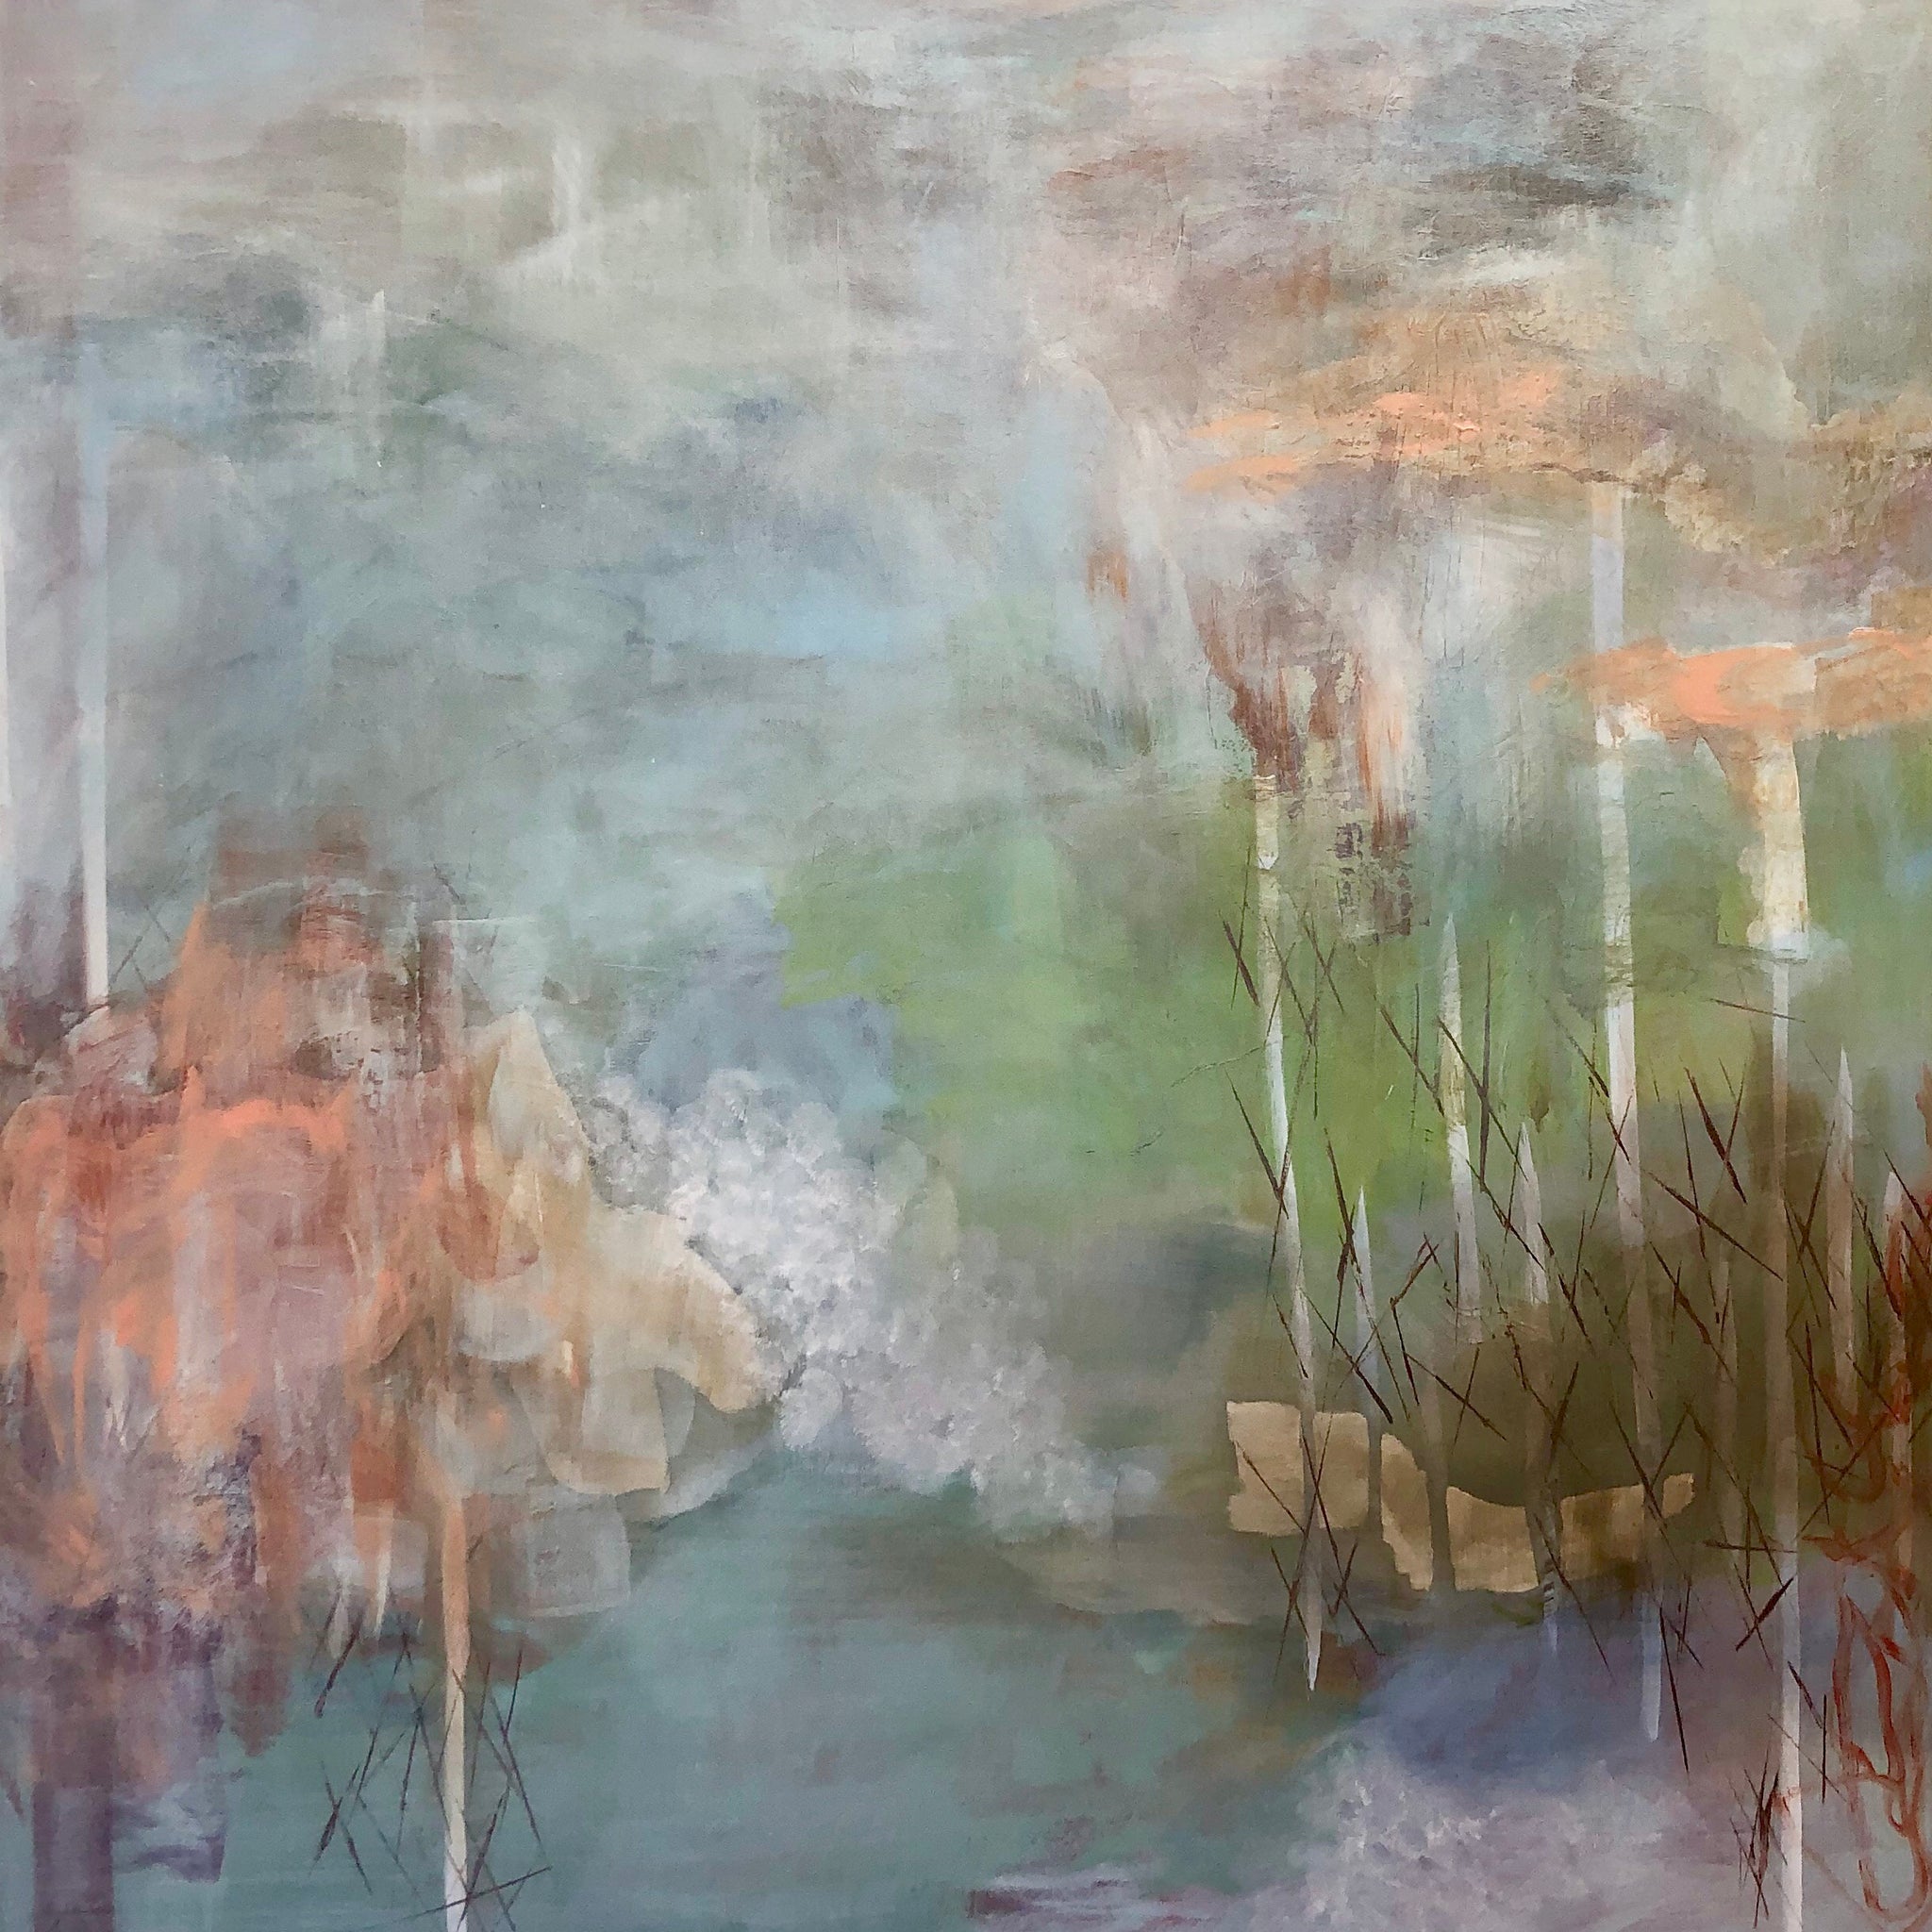 Juanita Bellavance, On the river 1, 2018, Acrylic, 48 x 48 inches